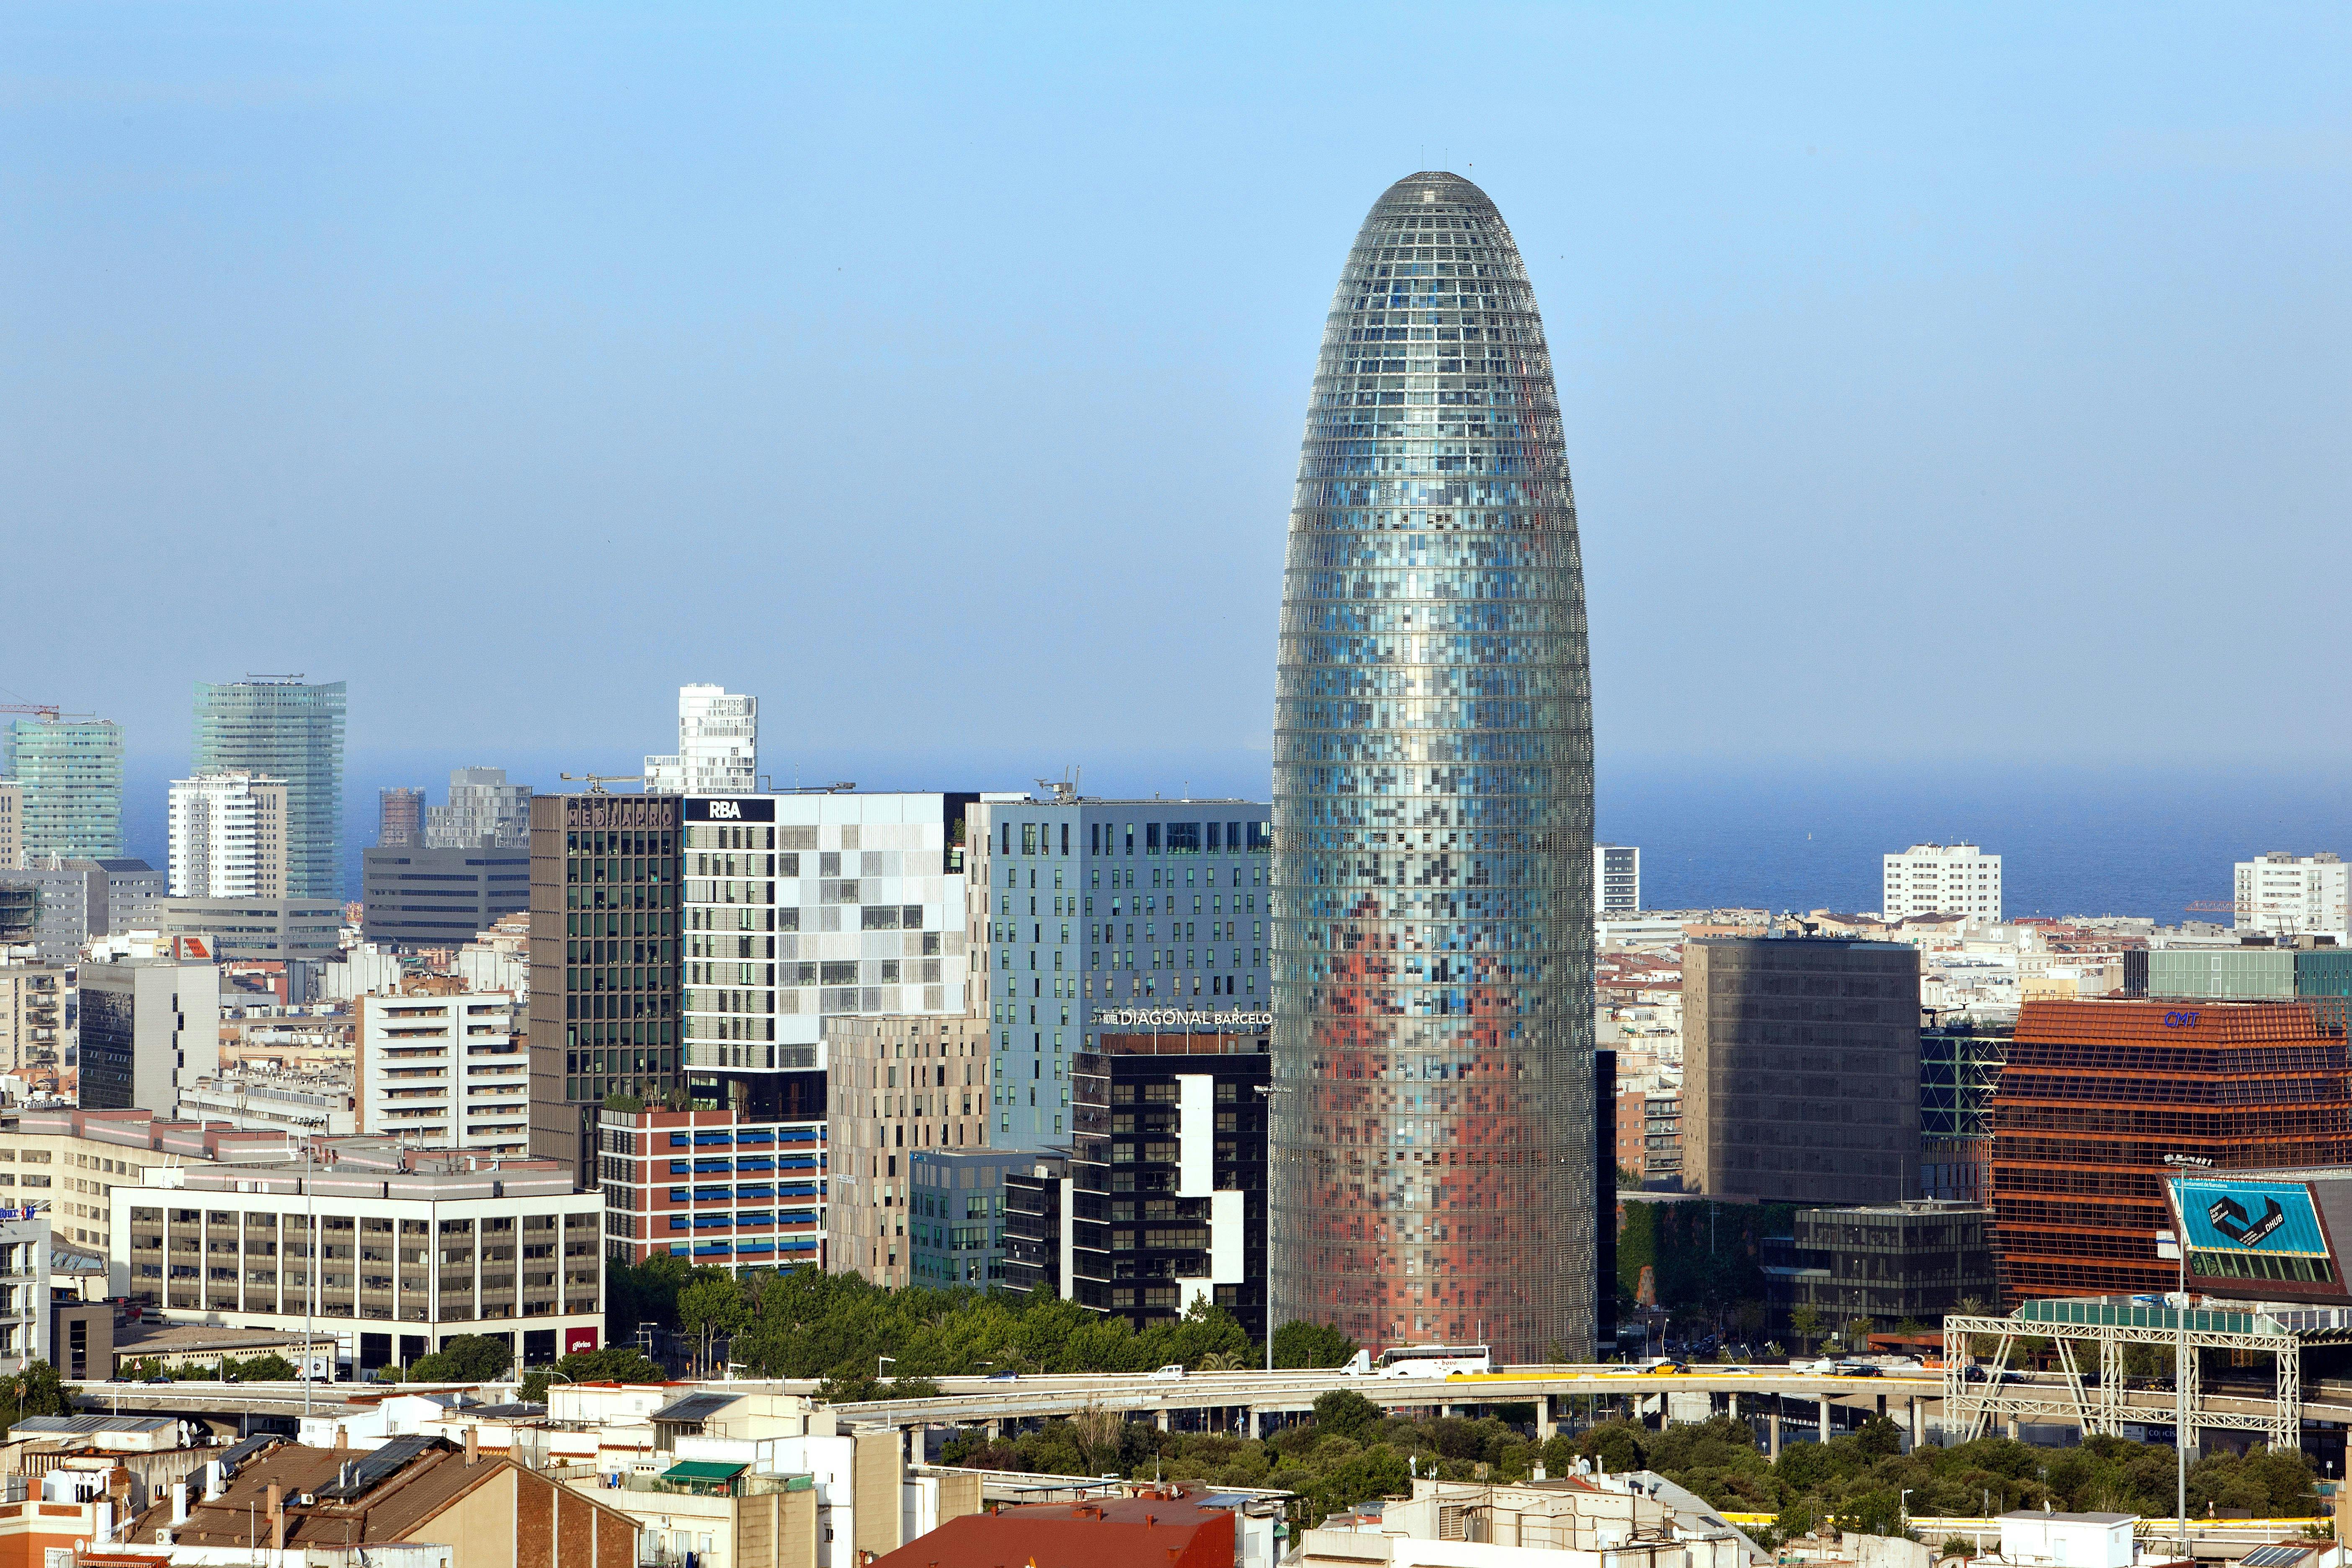 An image of the Tore Glories in Barcelona